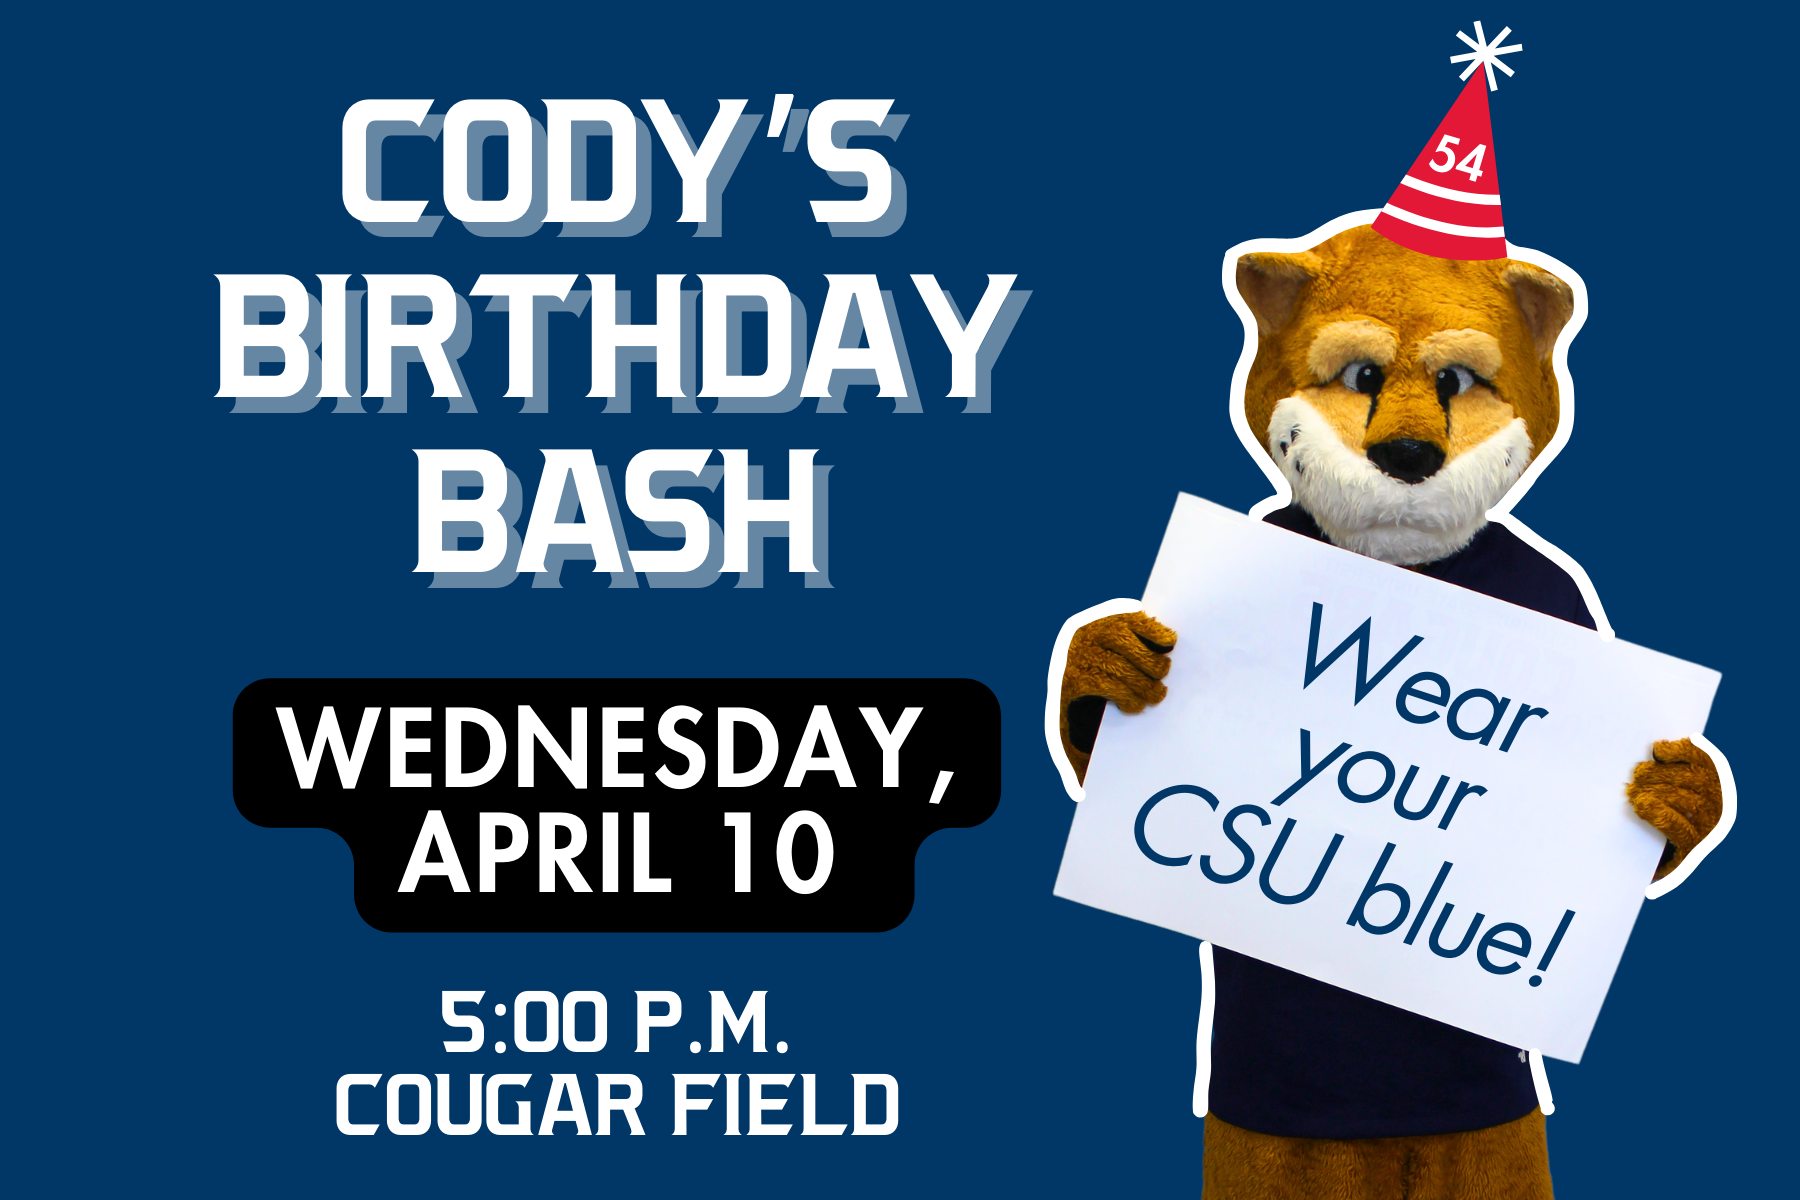 Image of Cody the Cougar holding a sign reading "Wear your CSU blue" with text: Cody's Birthday Bash, Wednesday, April 10, 5:30 p.m., Cougar Field.